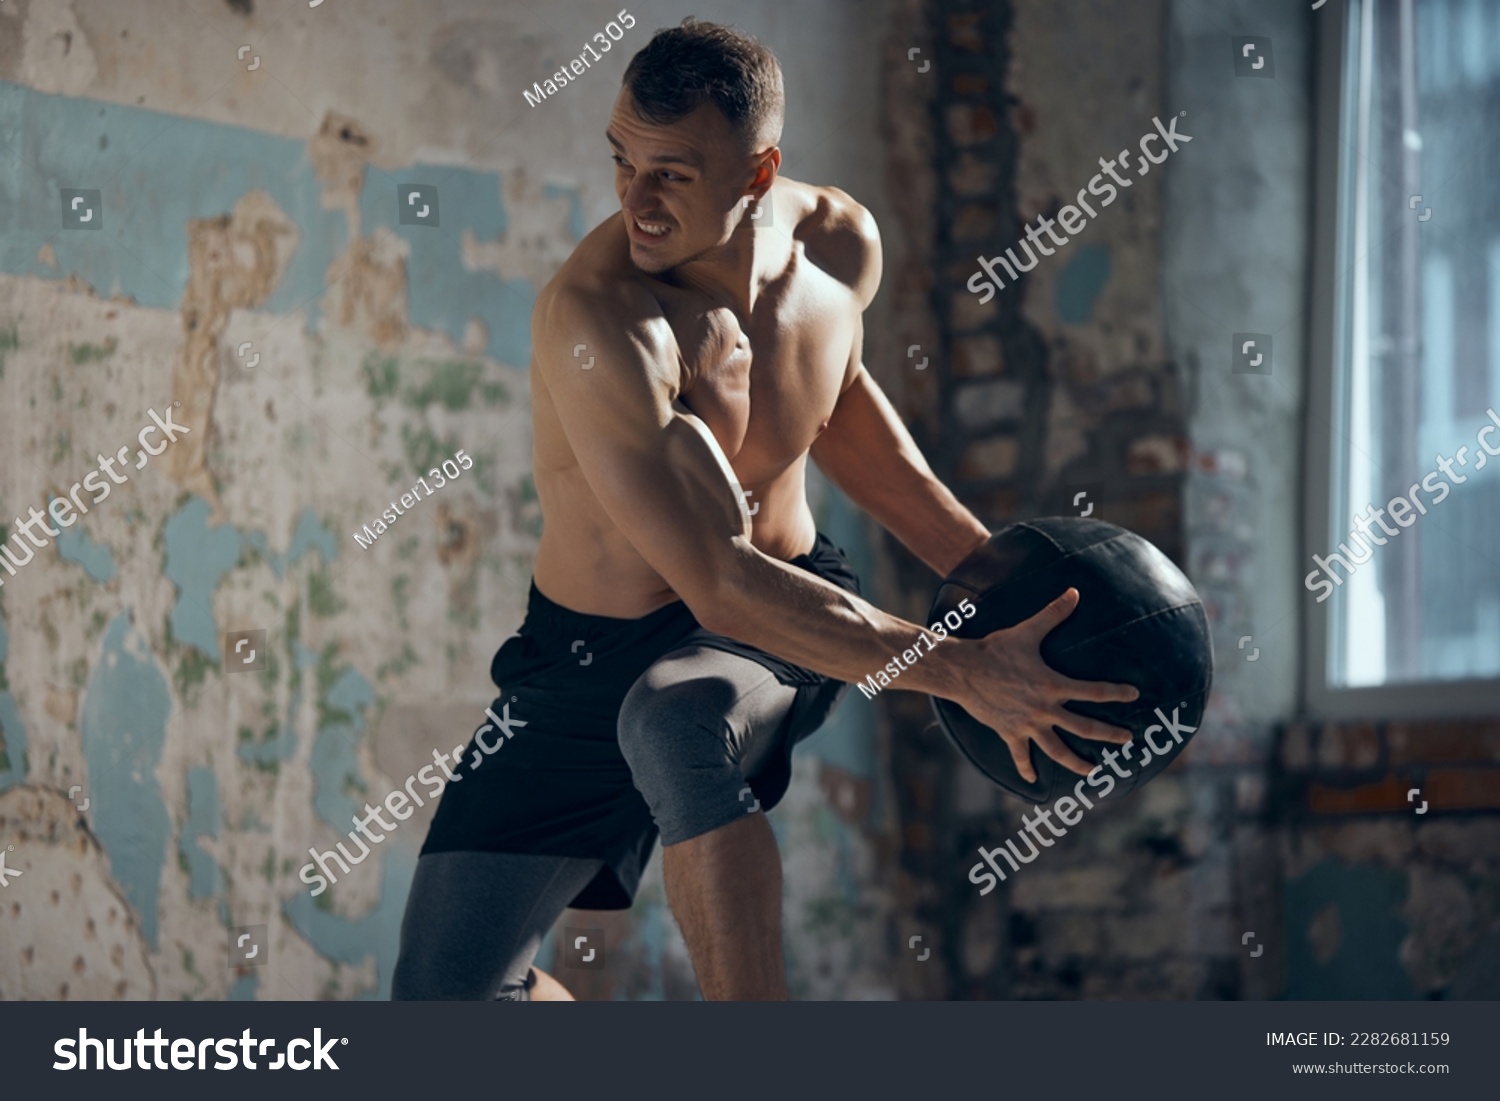 Full body workout. Young muscular man with strong, relief body shape training shirtless with fitness ball indoors. Sweat body. Concept of sportive lifestyle, body care, fitness, hobby, health #2282681159